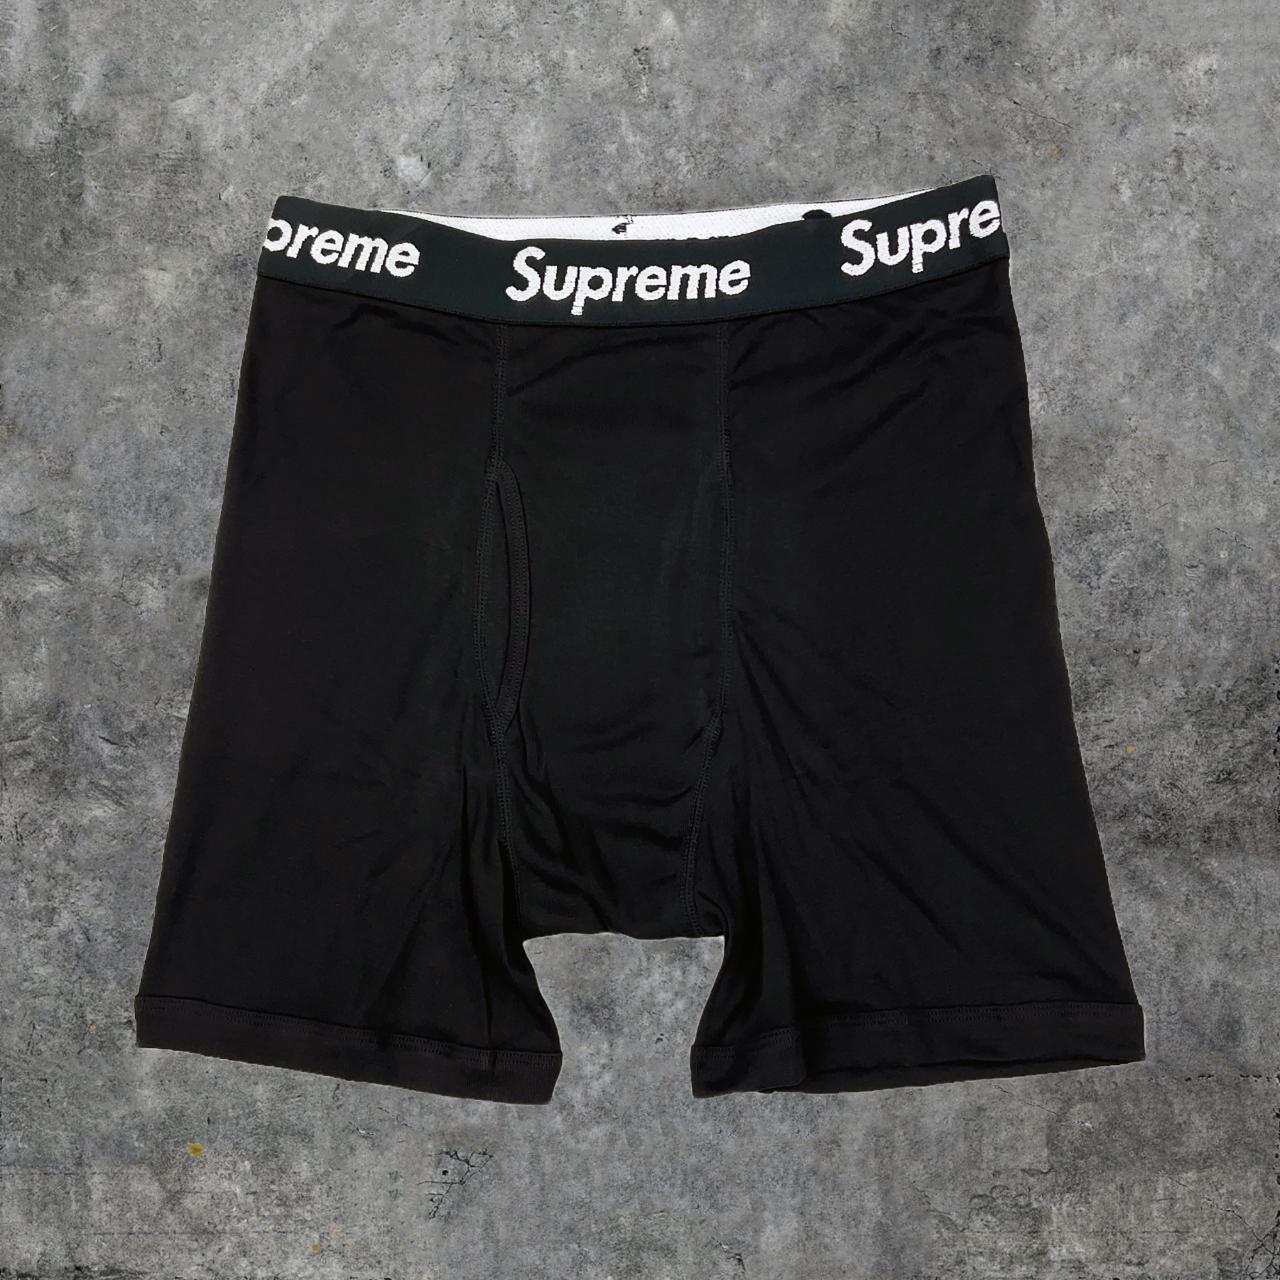 You are viewing 2 pairs of SAXX Boxer Briefs in - Depop